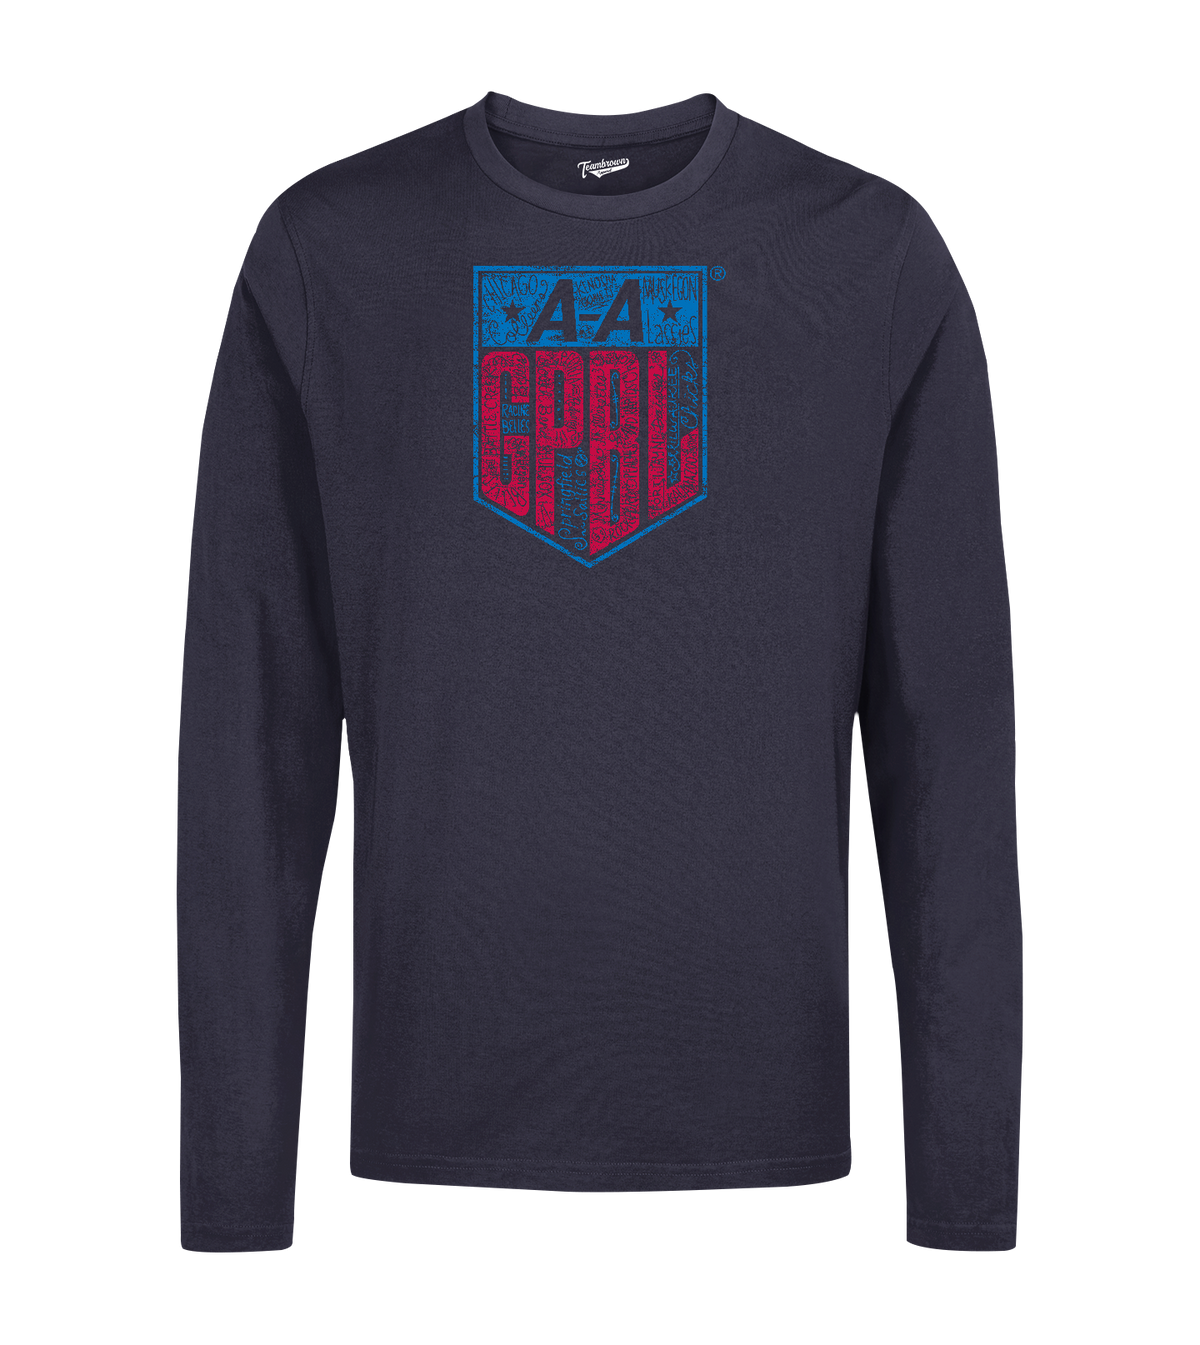 AAGPBL 1943-1954 - Unisex Long Sleeve Crew T-Shirt | Officially Licensed - AAGPBL